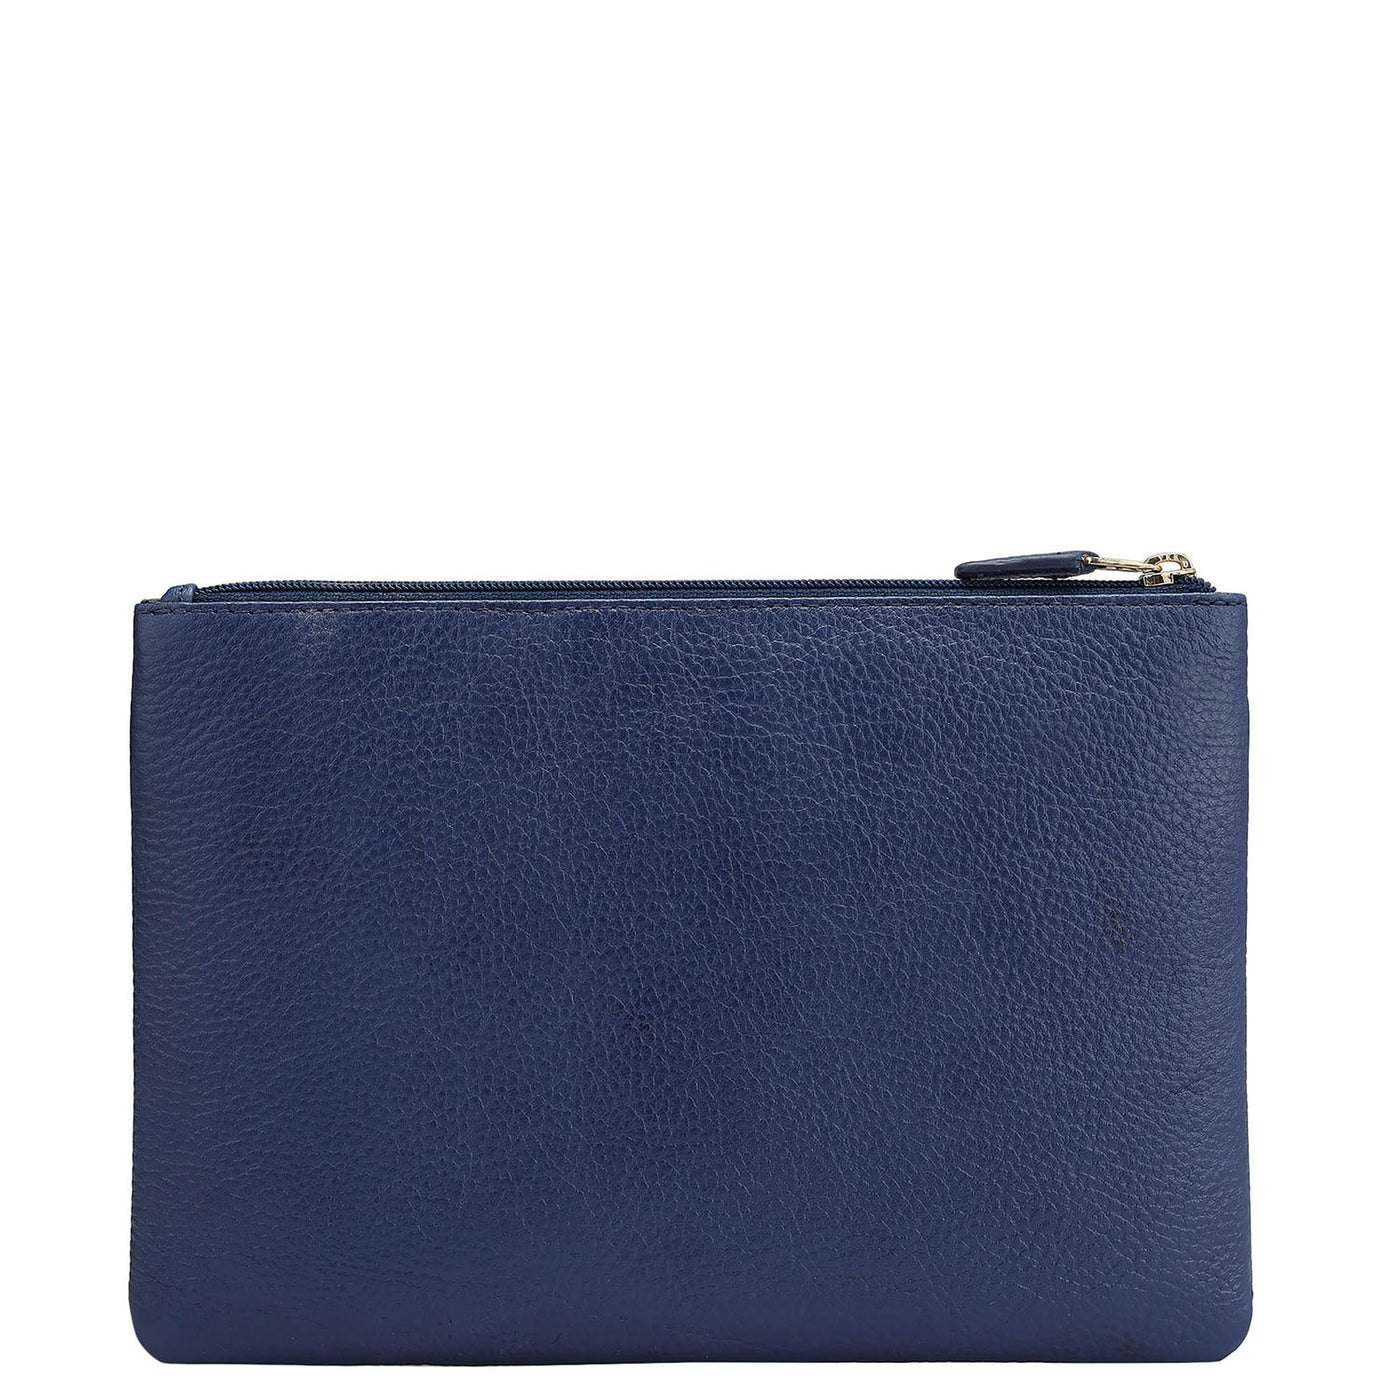 Wax Leather Multi Pouch - Light Blue